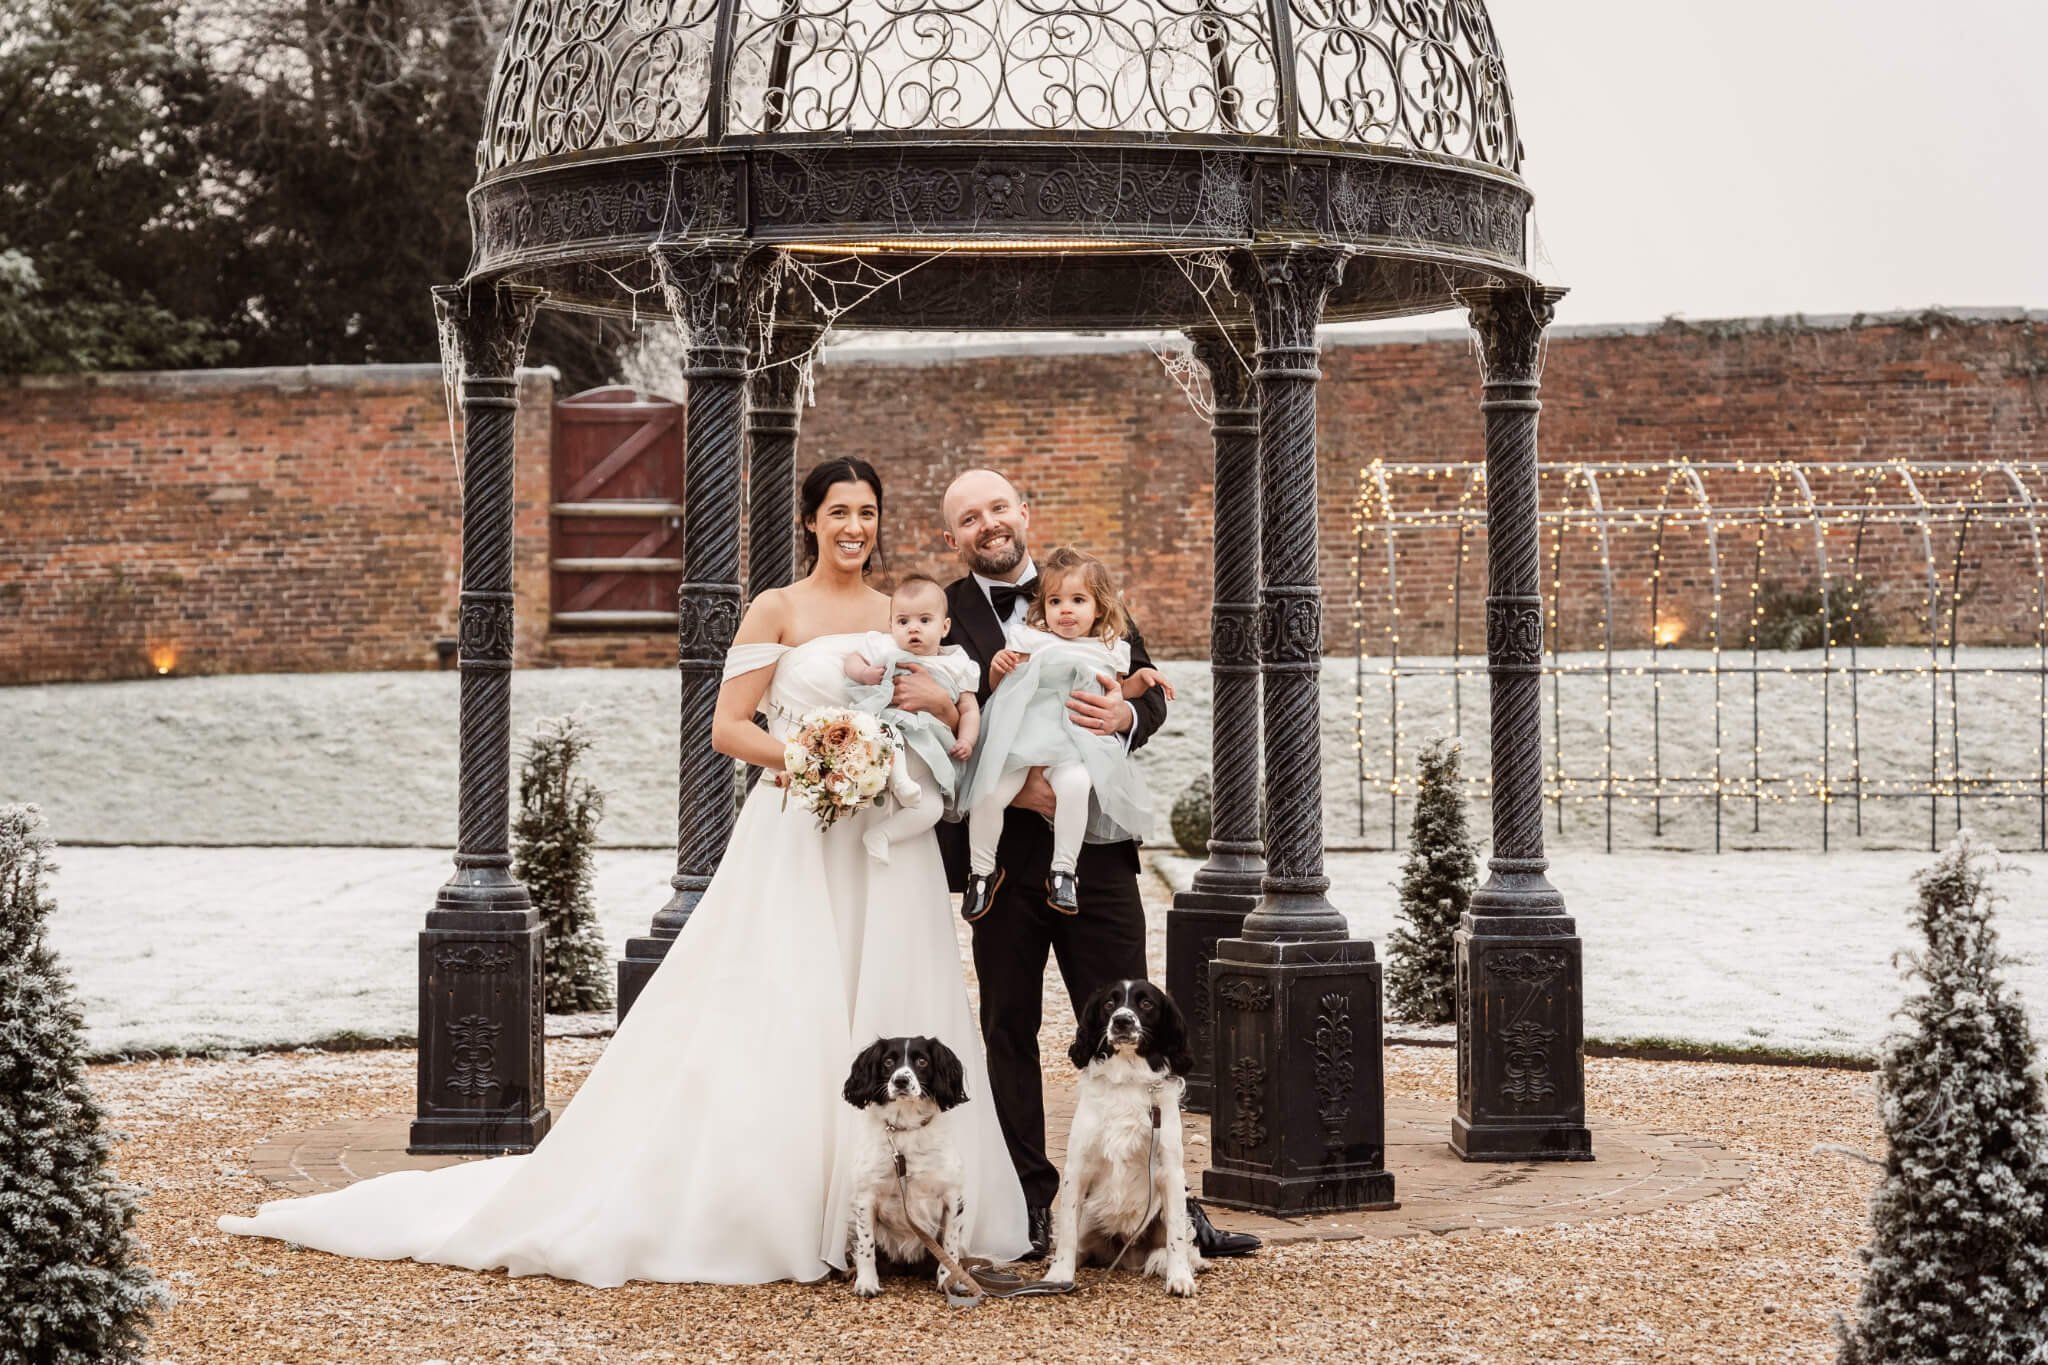 Family wedding with pets at Foxtail Barns